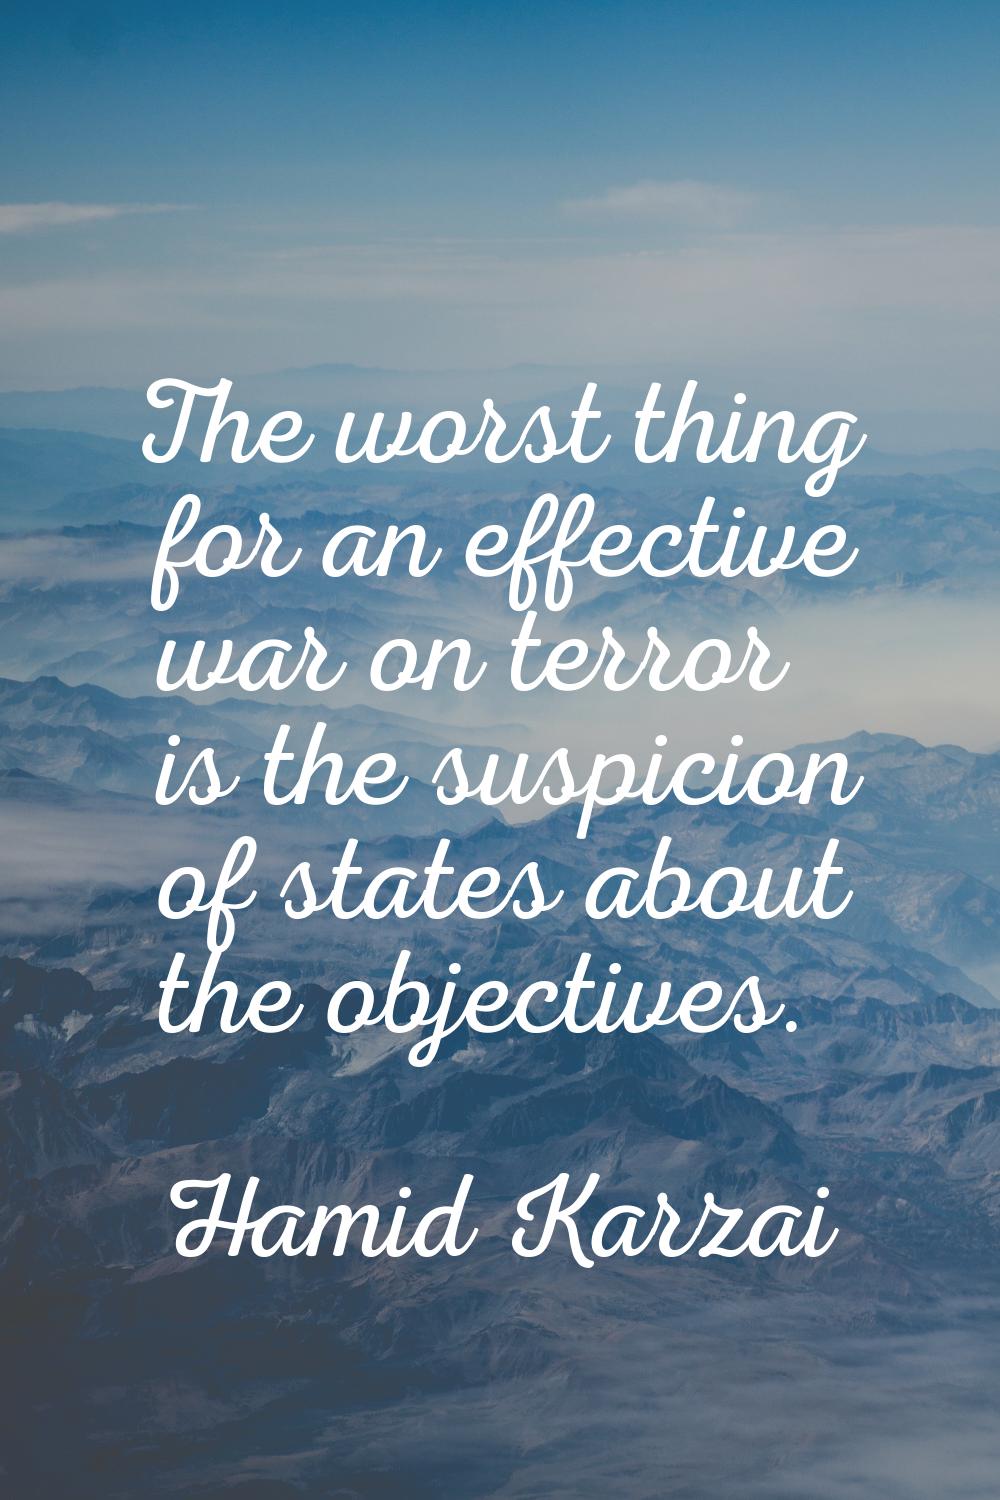 The worst thing for an effective war on terror is the suspicion of states about the objectives.